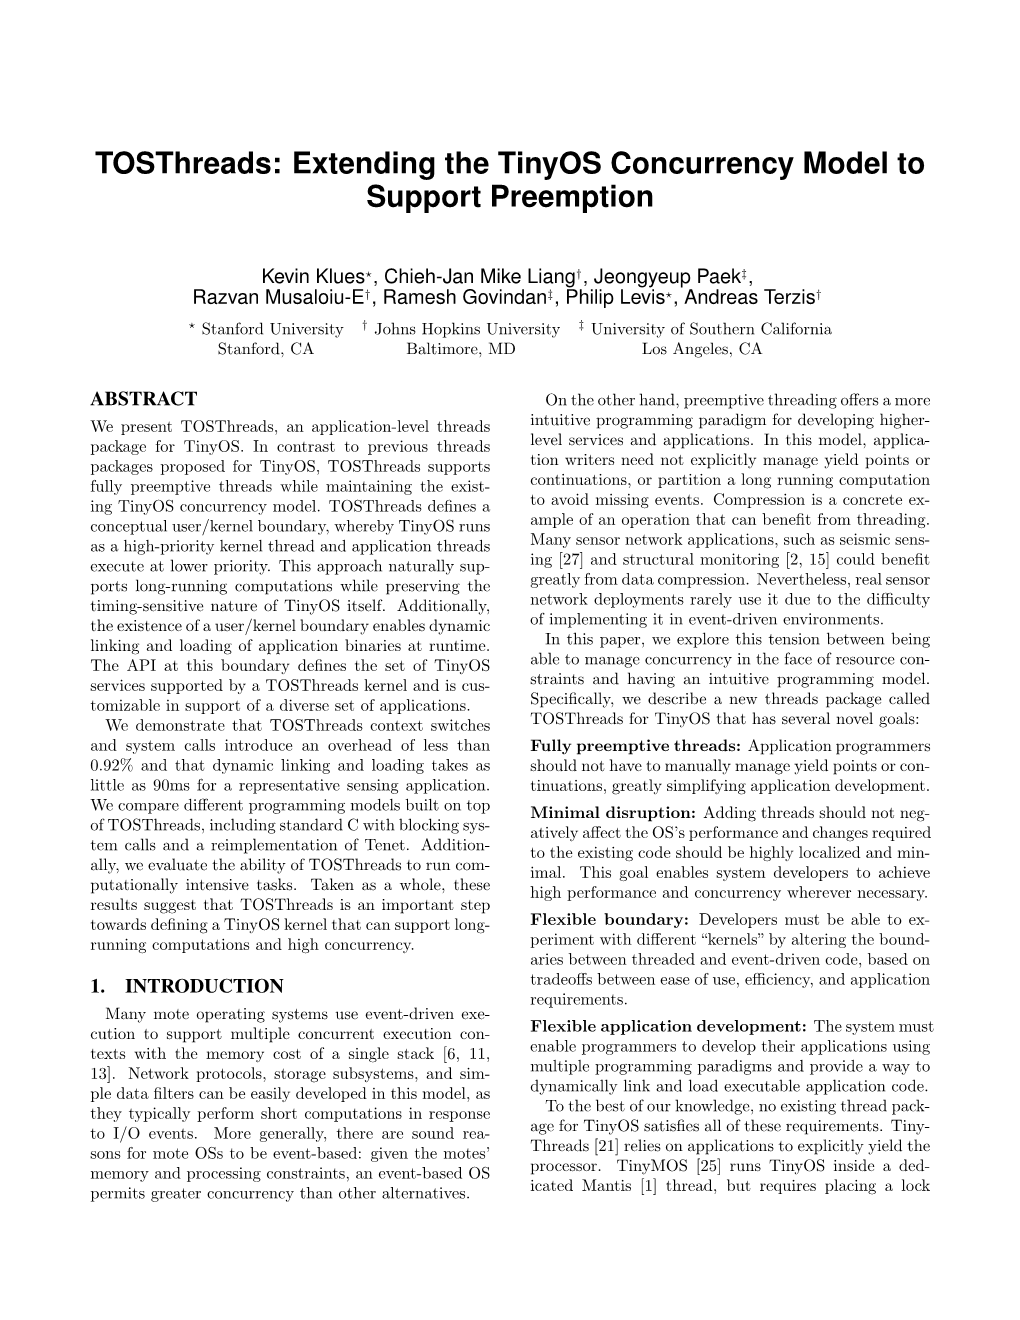 Tosthreads: Extending the Tinyos Concurrency Model to Support Preemption